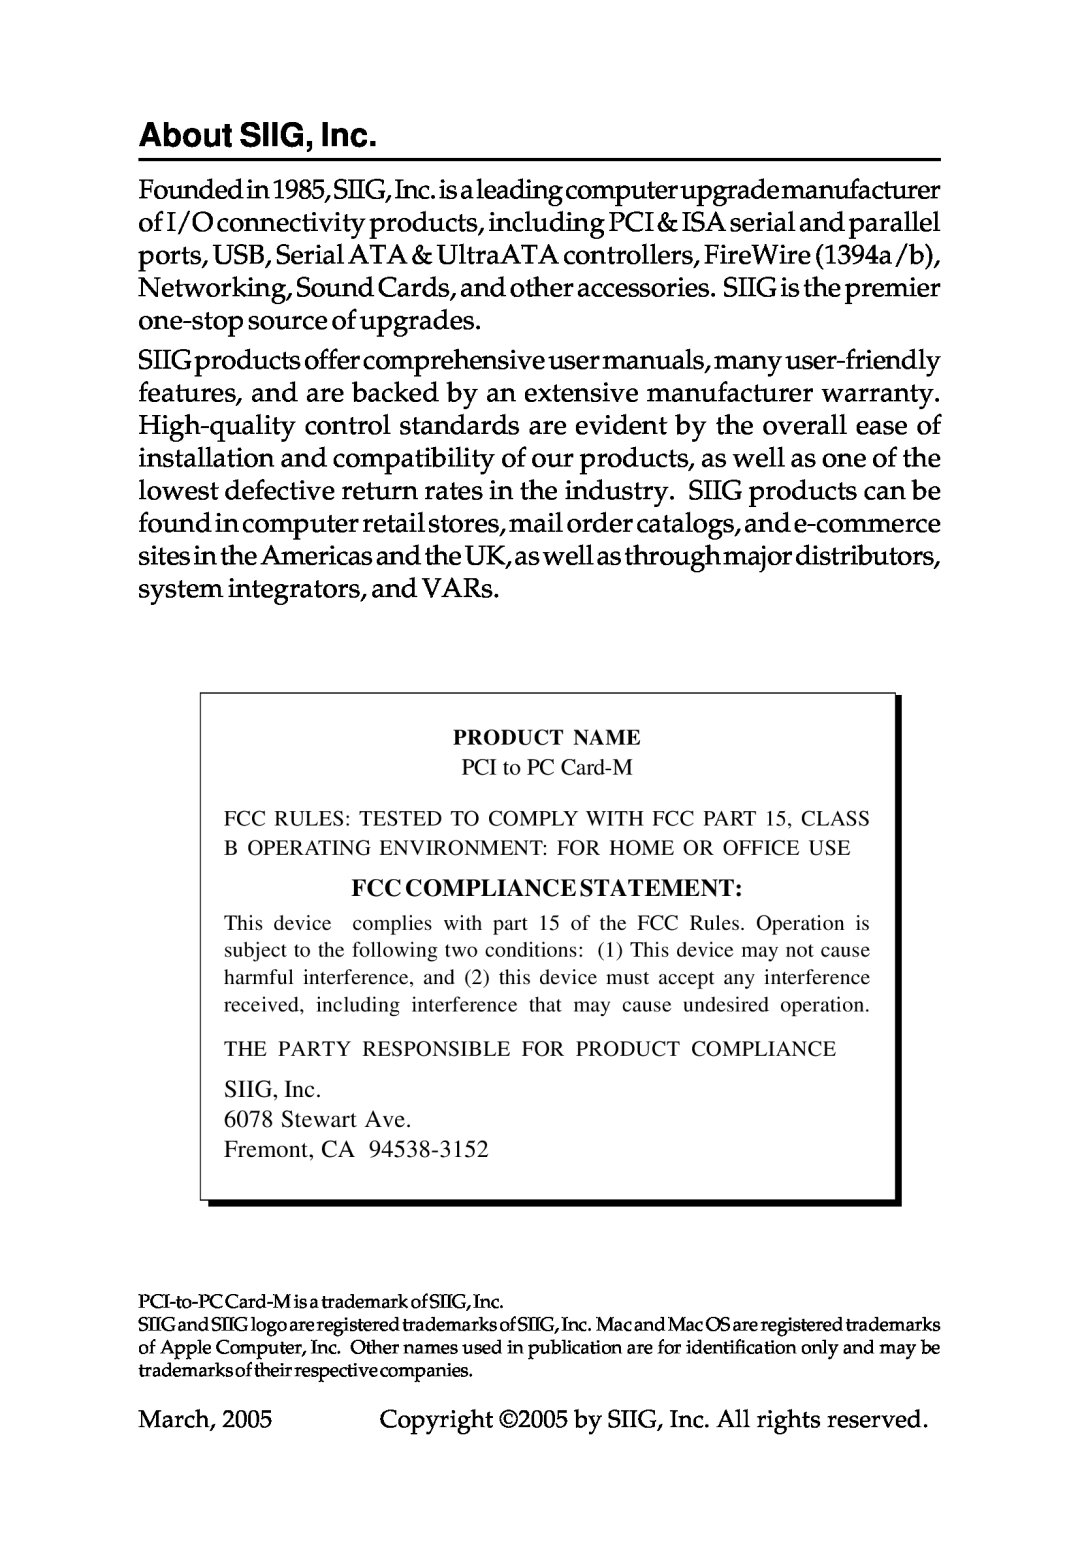 SIIG Network Card manual About SIIG, Inc, Fcc Compliance Statement 